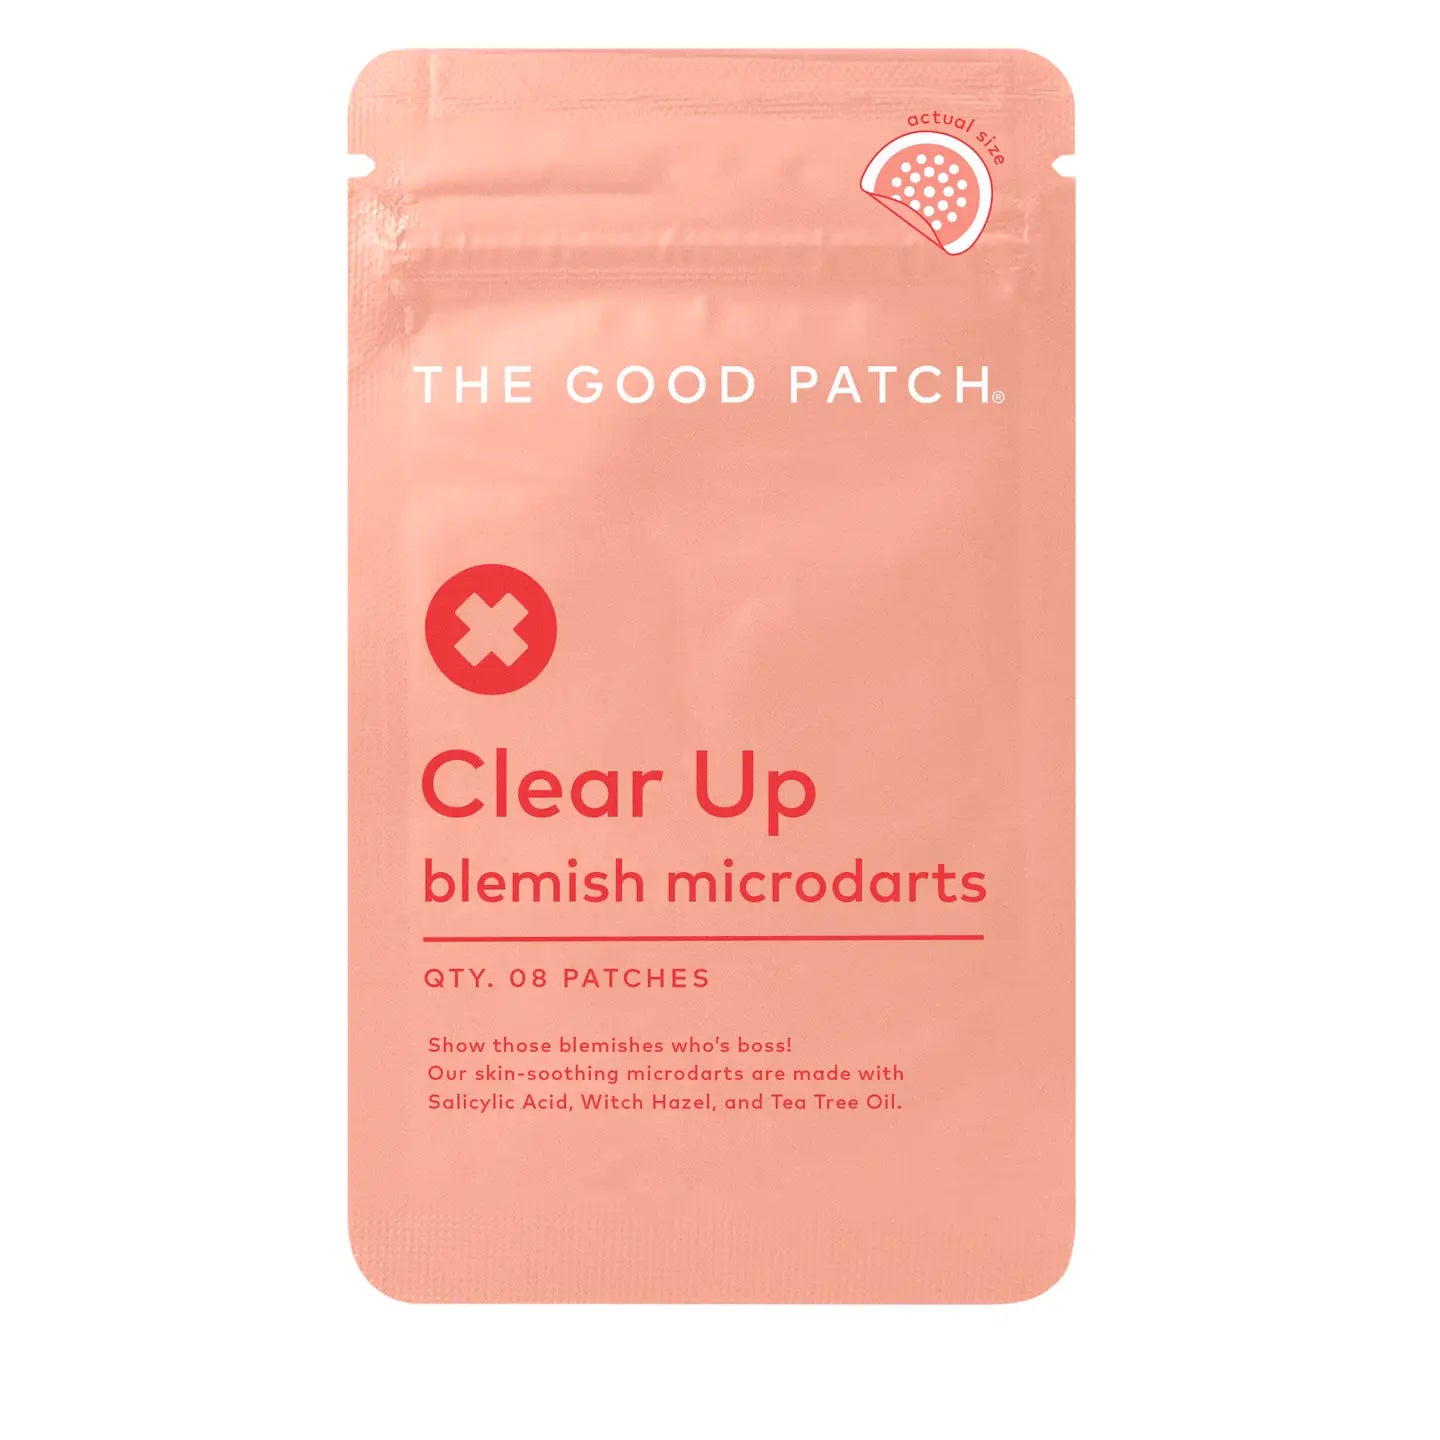 The Good Patch Clear Up Blemish Microdarts